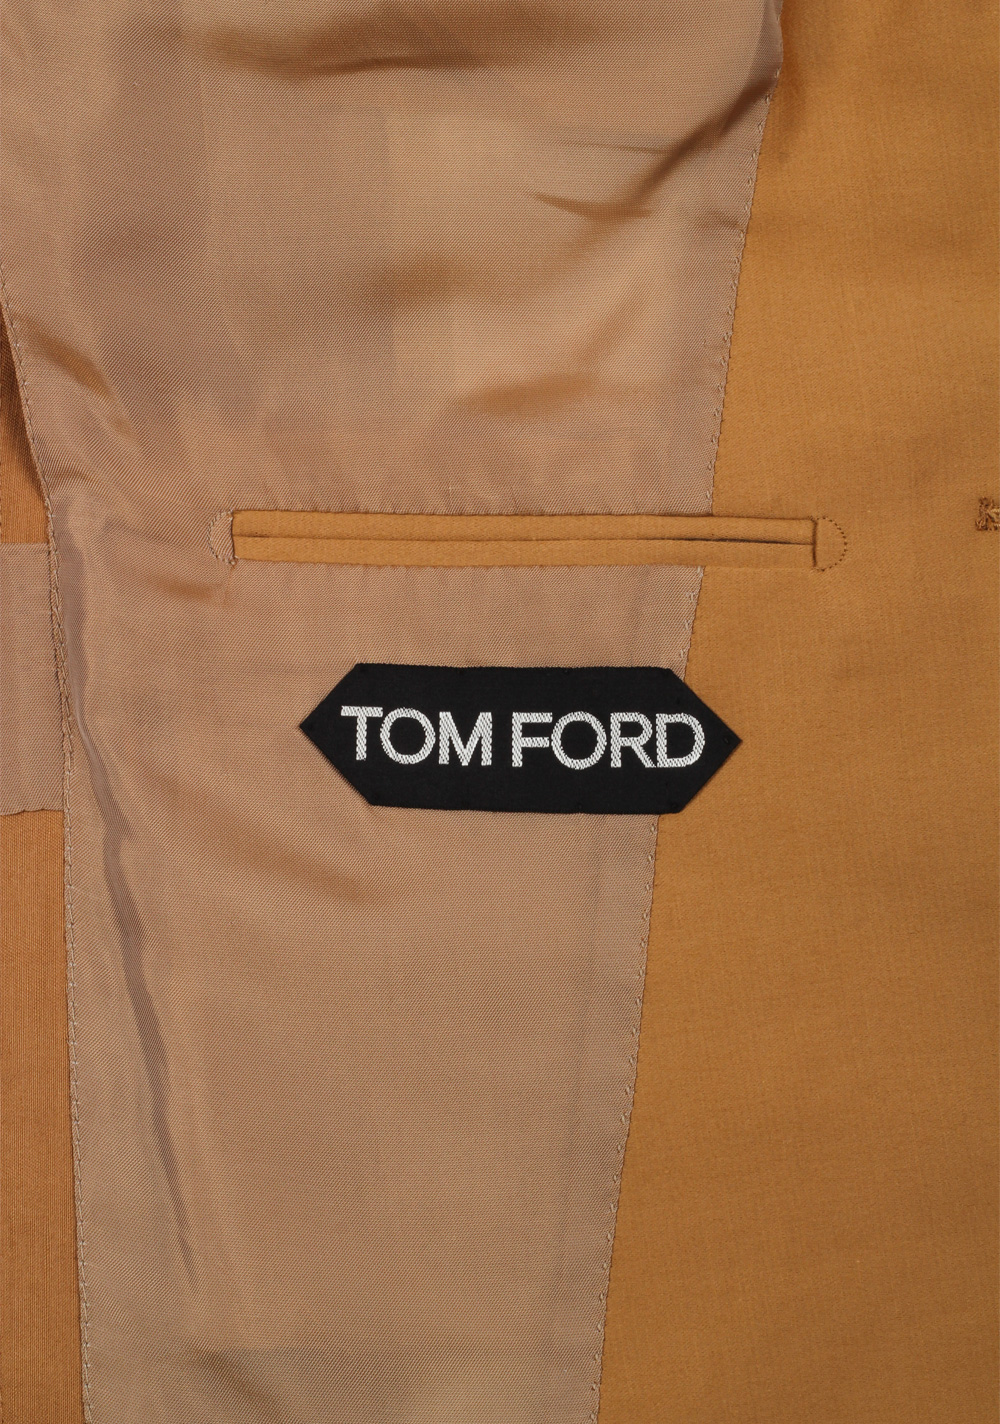 TOM FORD Atticus Sand Suit Size 46 / 36R U.S. In Cotton Linen | Costume ...